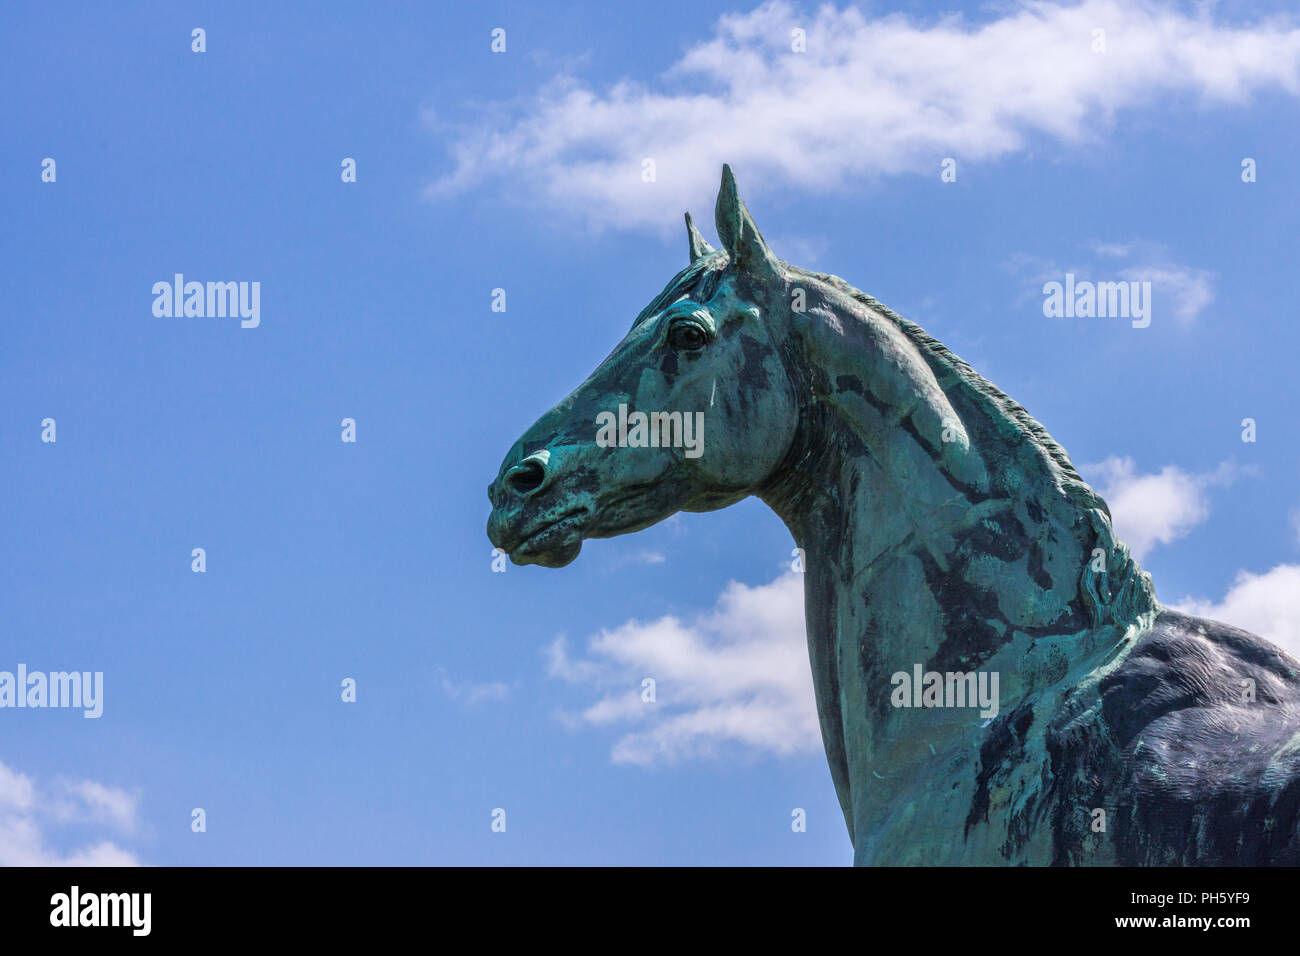 Edinburgh, Scotland, UK - June 14, 2012: Closeup of Horse statue of King Tom looking at Firth of Forth at Dalmeny House. Head and shoulders. Blue sky. Stock Photo